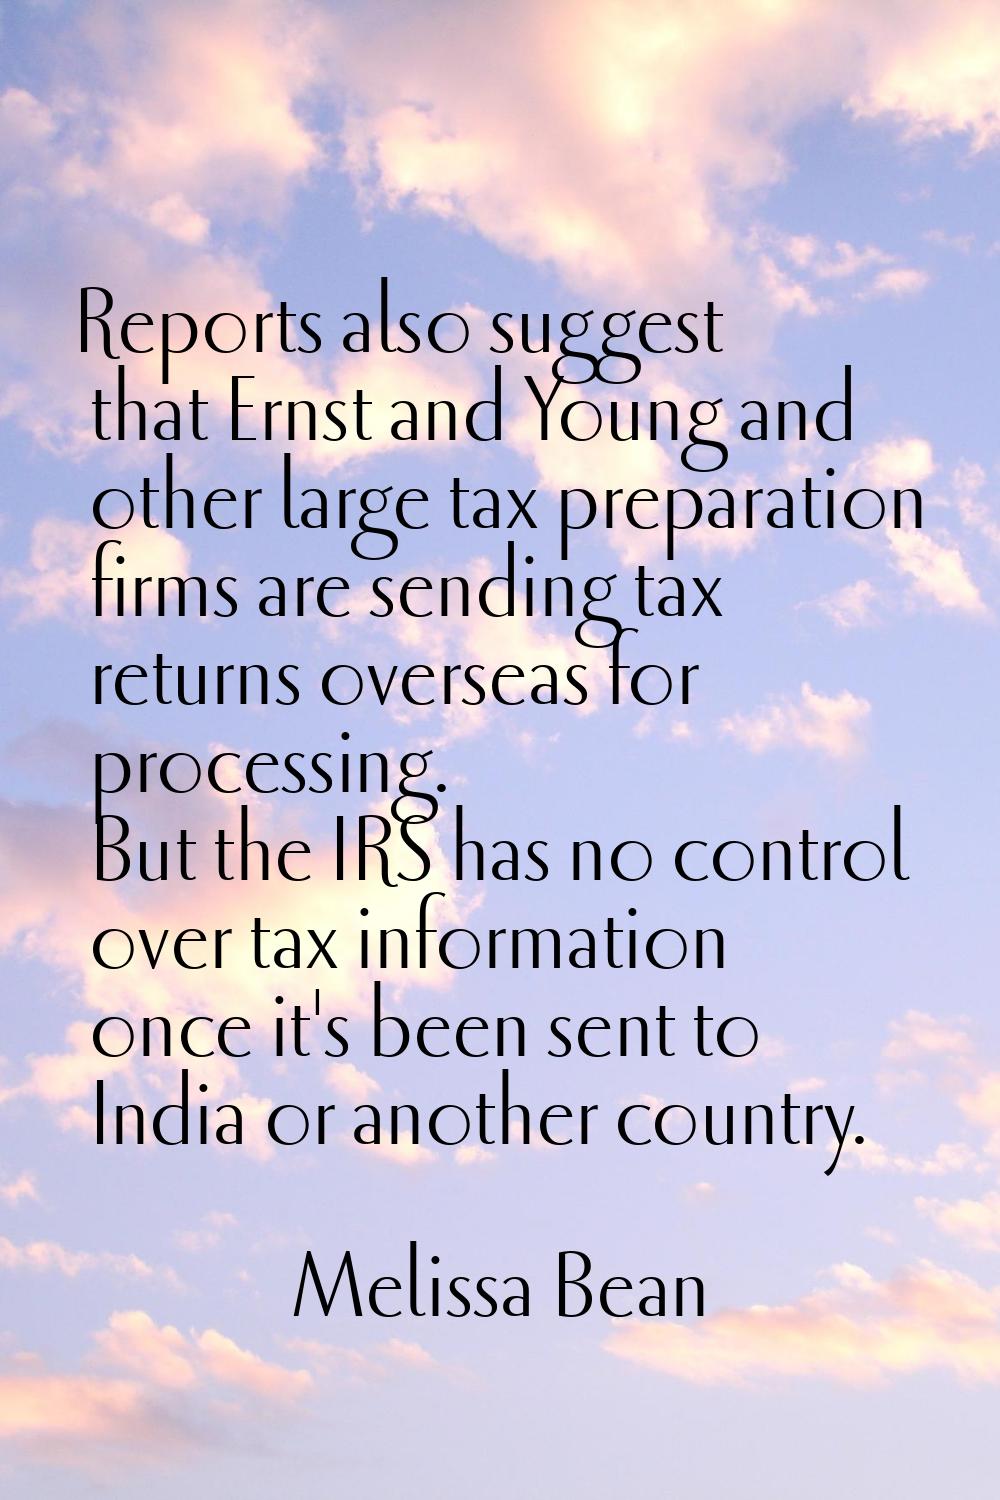 Reports also suggest that Ernst and Young and other large tax preparation firms are sending tax ret